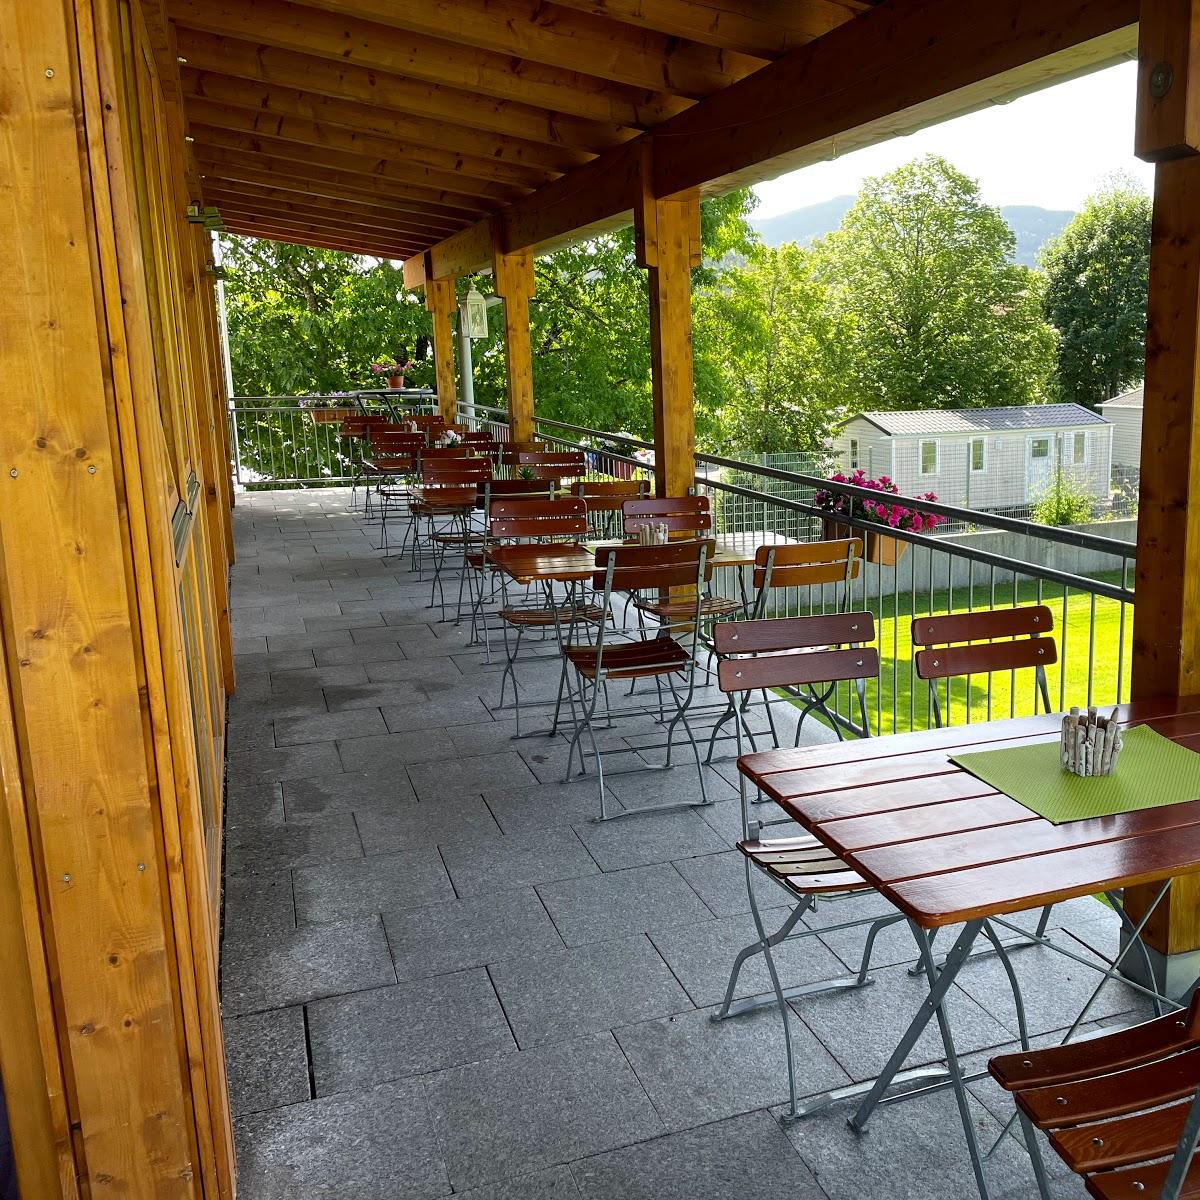 Restaurant "Hedonist- Pizza, Grill & Crepes" in Bad Tölz